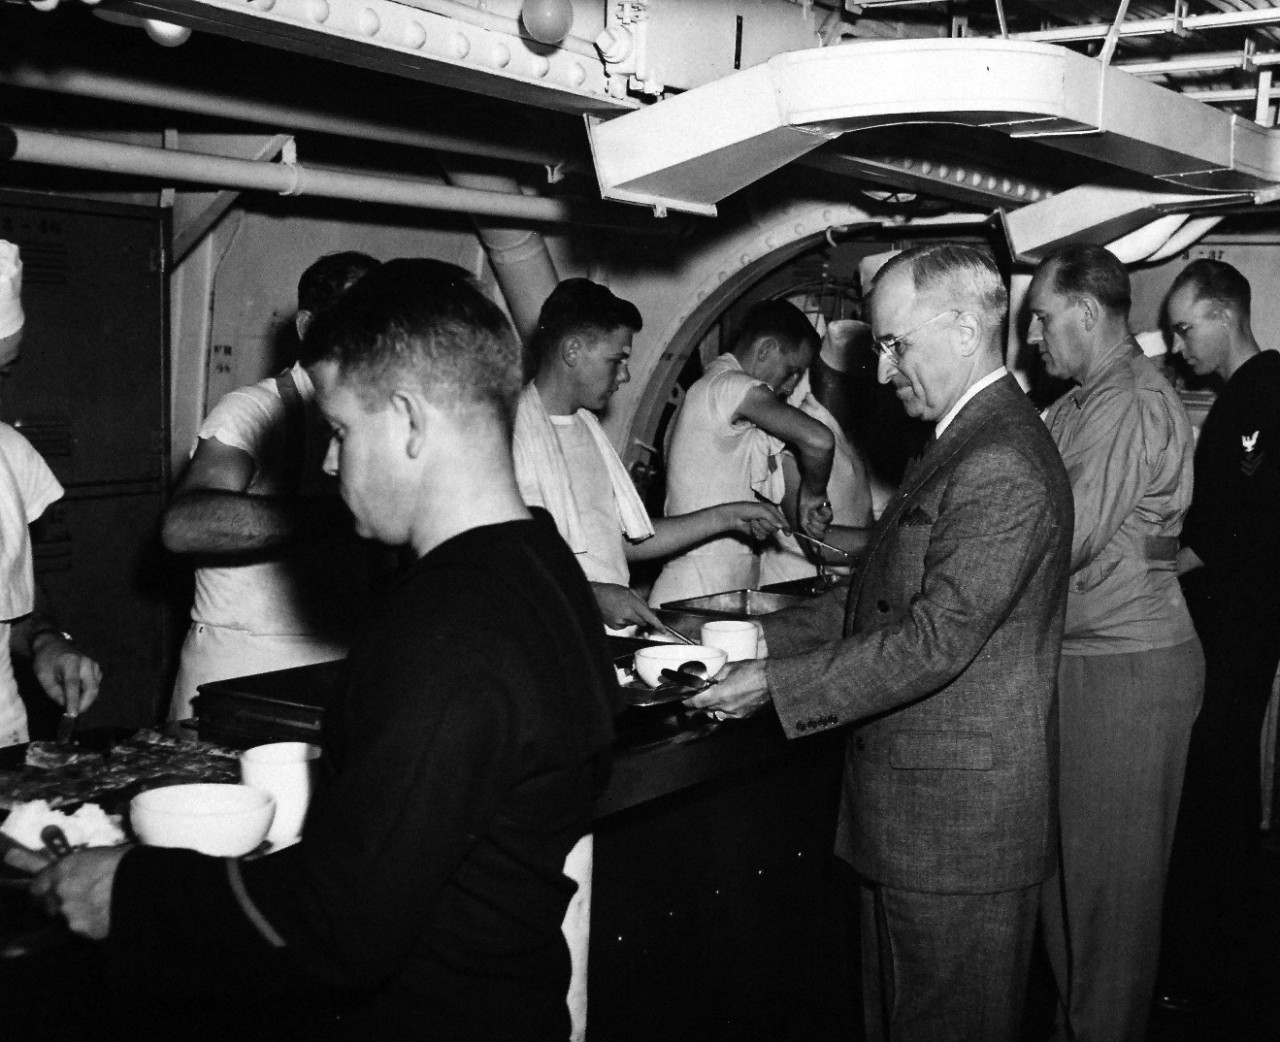 80-G-49928:  Potsdam Conference, July-August 1945.  President Harry S. Truman onboard USS Augusta (CA-31) en-route to Antwerp for the “Big Three” Conference.  Shown:  Being served in crew’s mess hall.  Faces which can be seen in the picture are:  (left to right):  S1/C Albert Rice; S1/c J.W. Leinback; S1/C .W. Smith, the President, a secret service man and PhM2/C Elmo C. Buck.  Photograph received July 18, 1945.  Official U.S. Navy Photograph, now in the collections of the National Archives.  (2016/02/23).